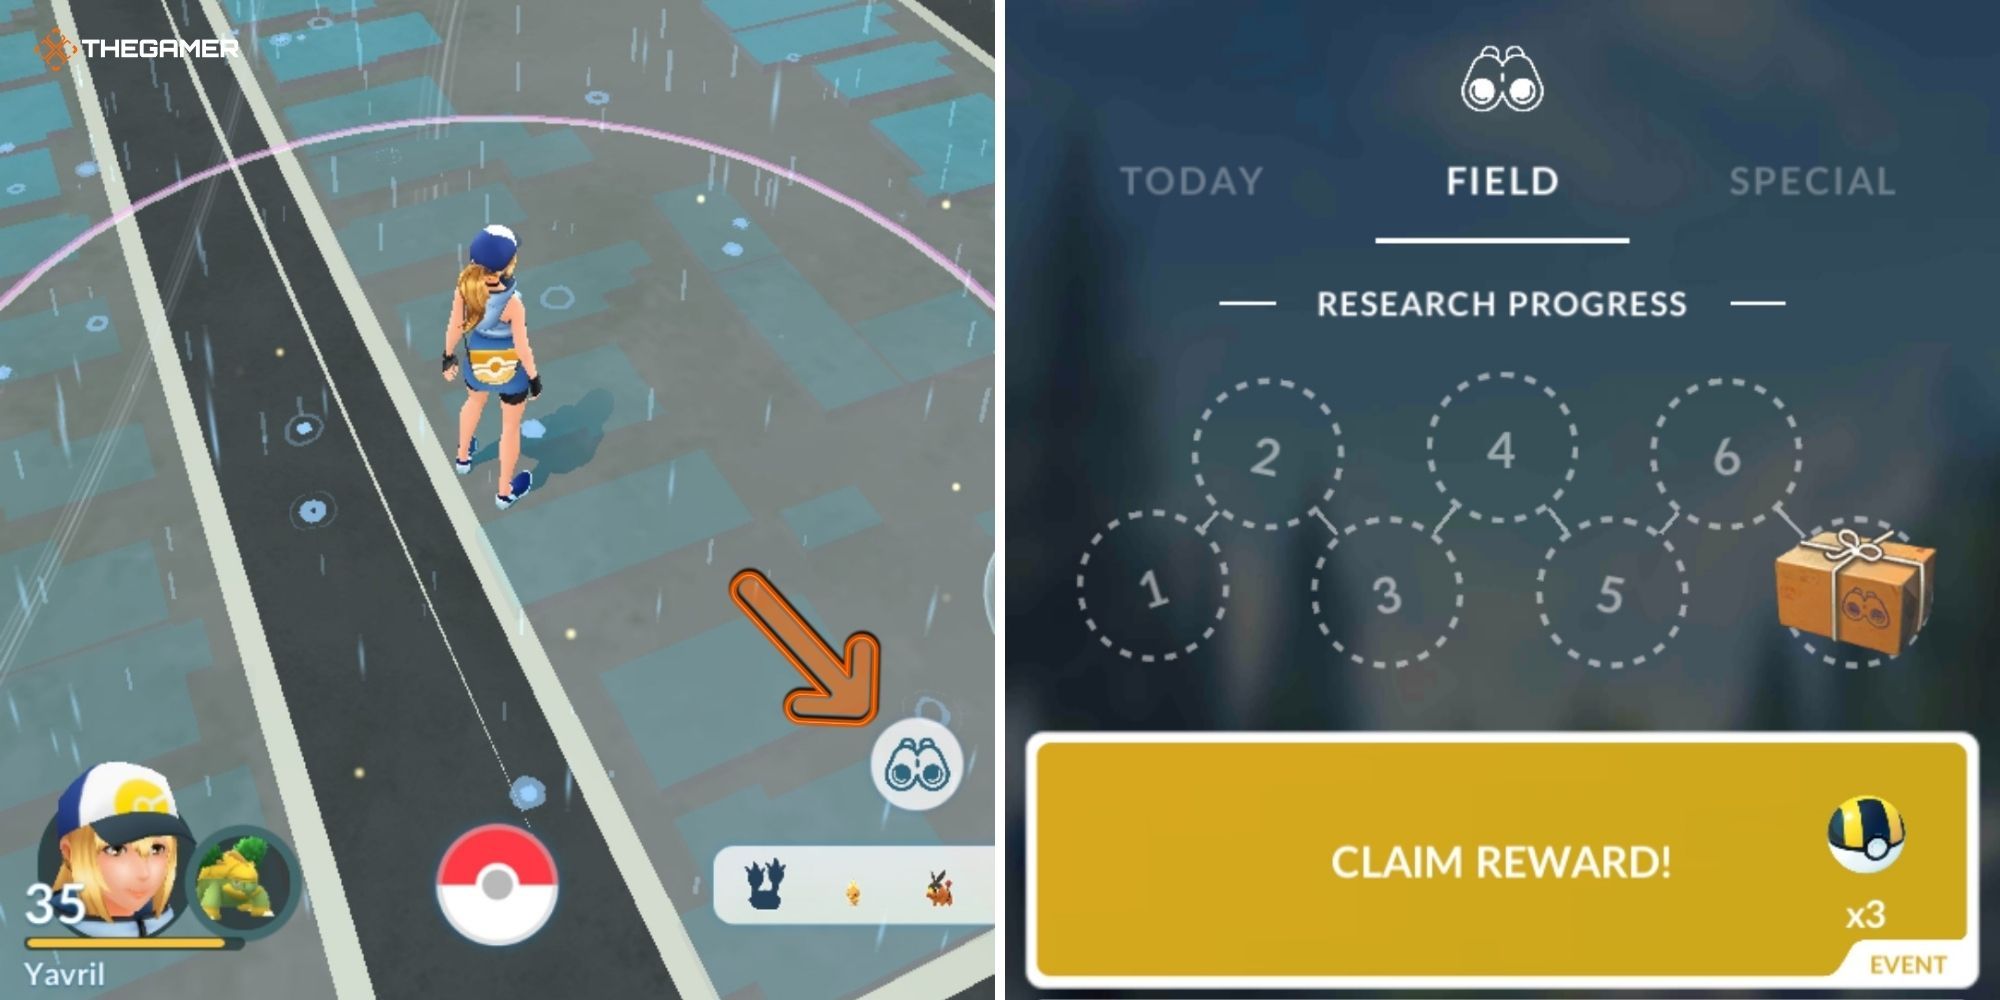 Pokemon GO - Overworld with player walking around and menu (left), Field Research Menu (right)